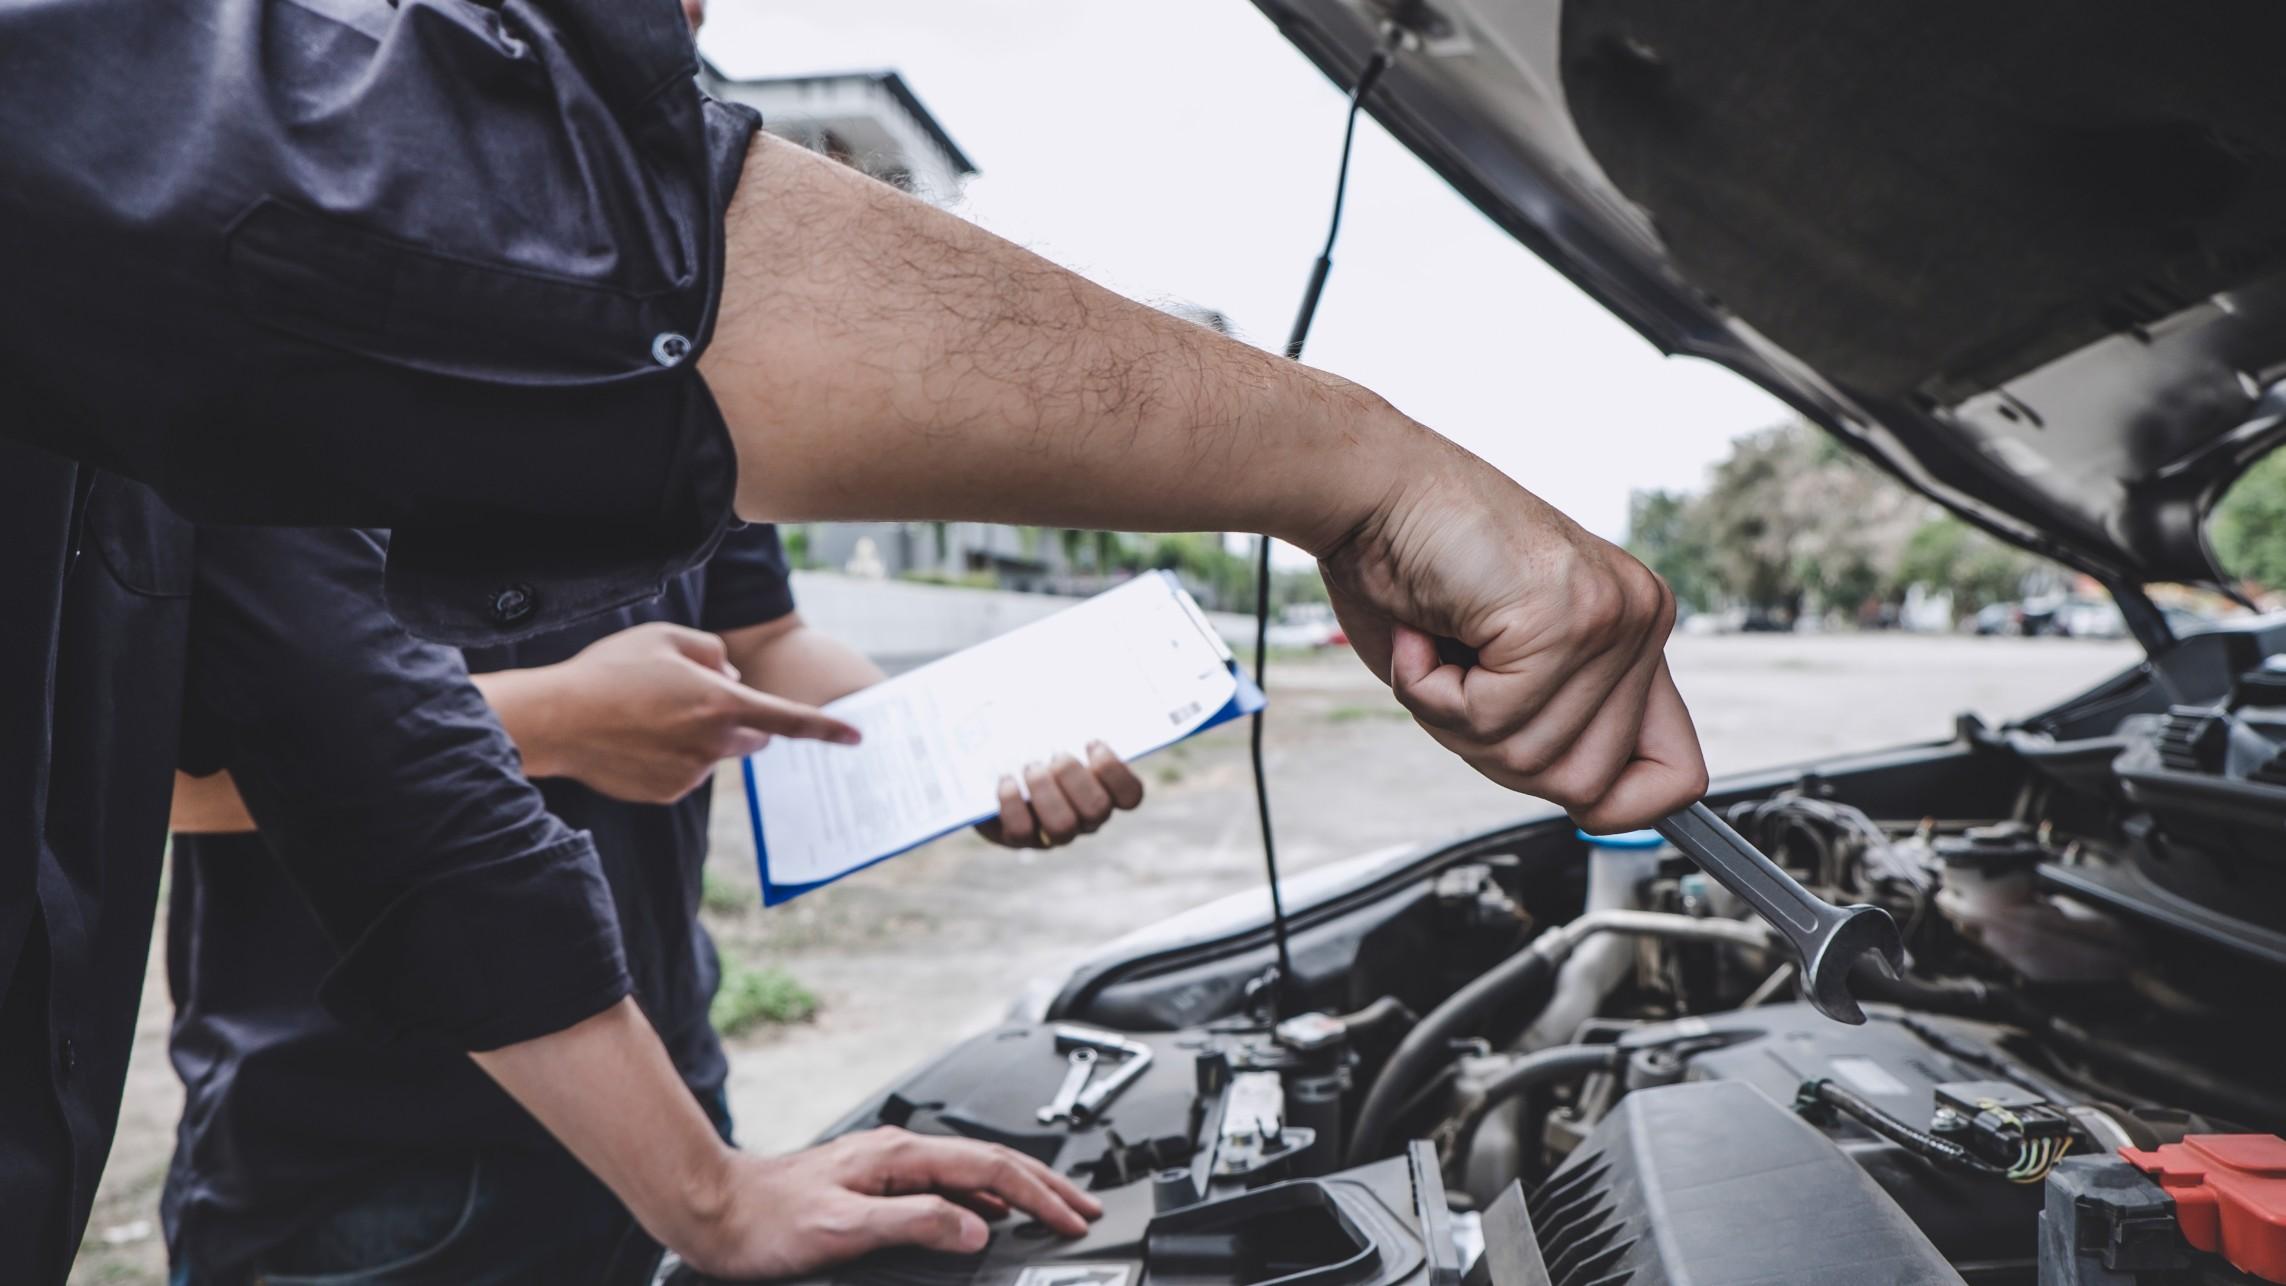 Car tune-ups will help expand the life of your vehicle and keep it in great shape.